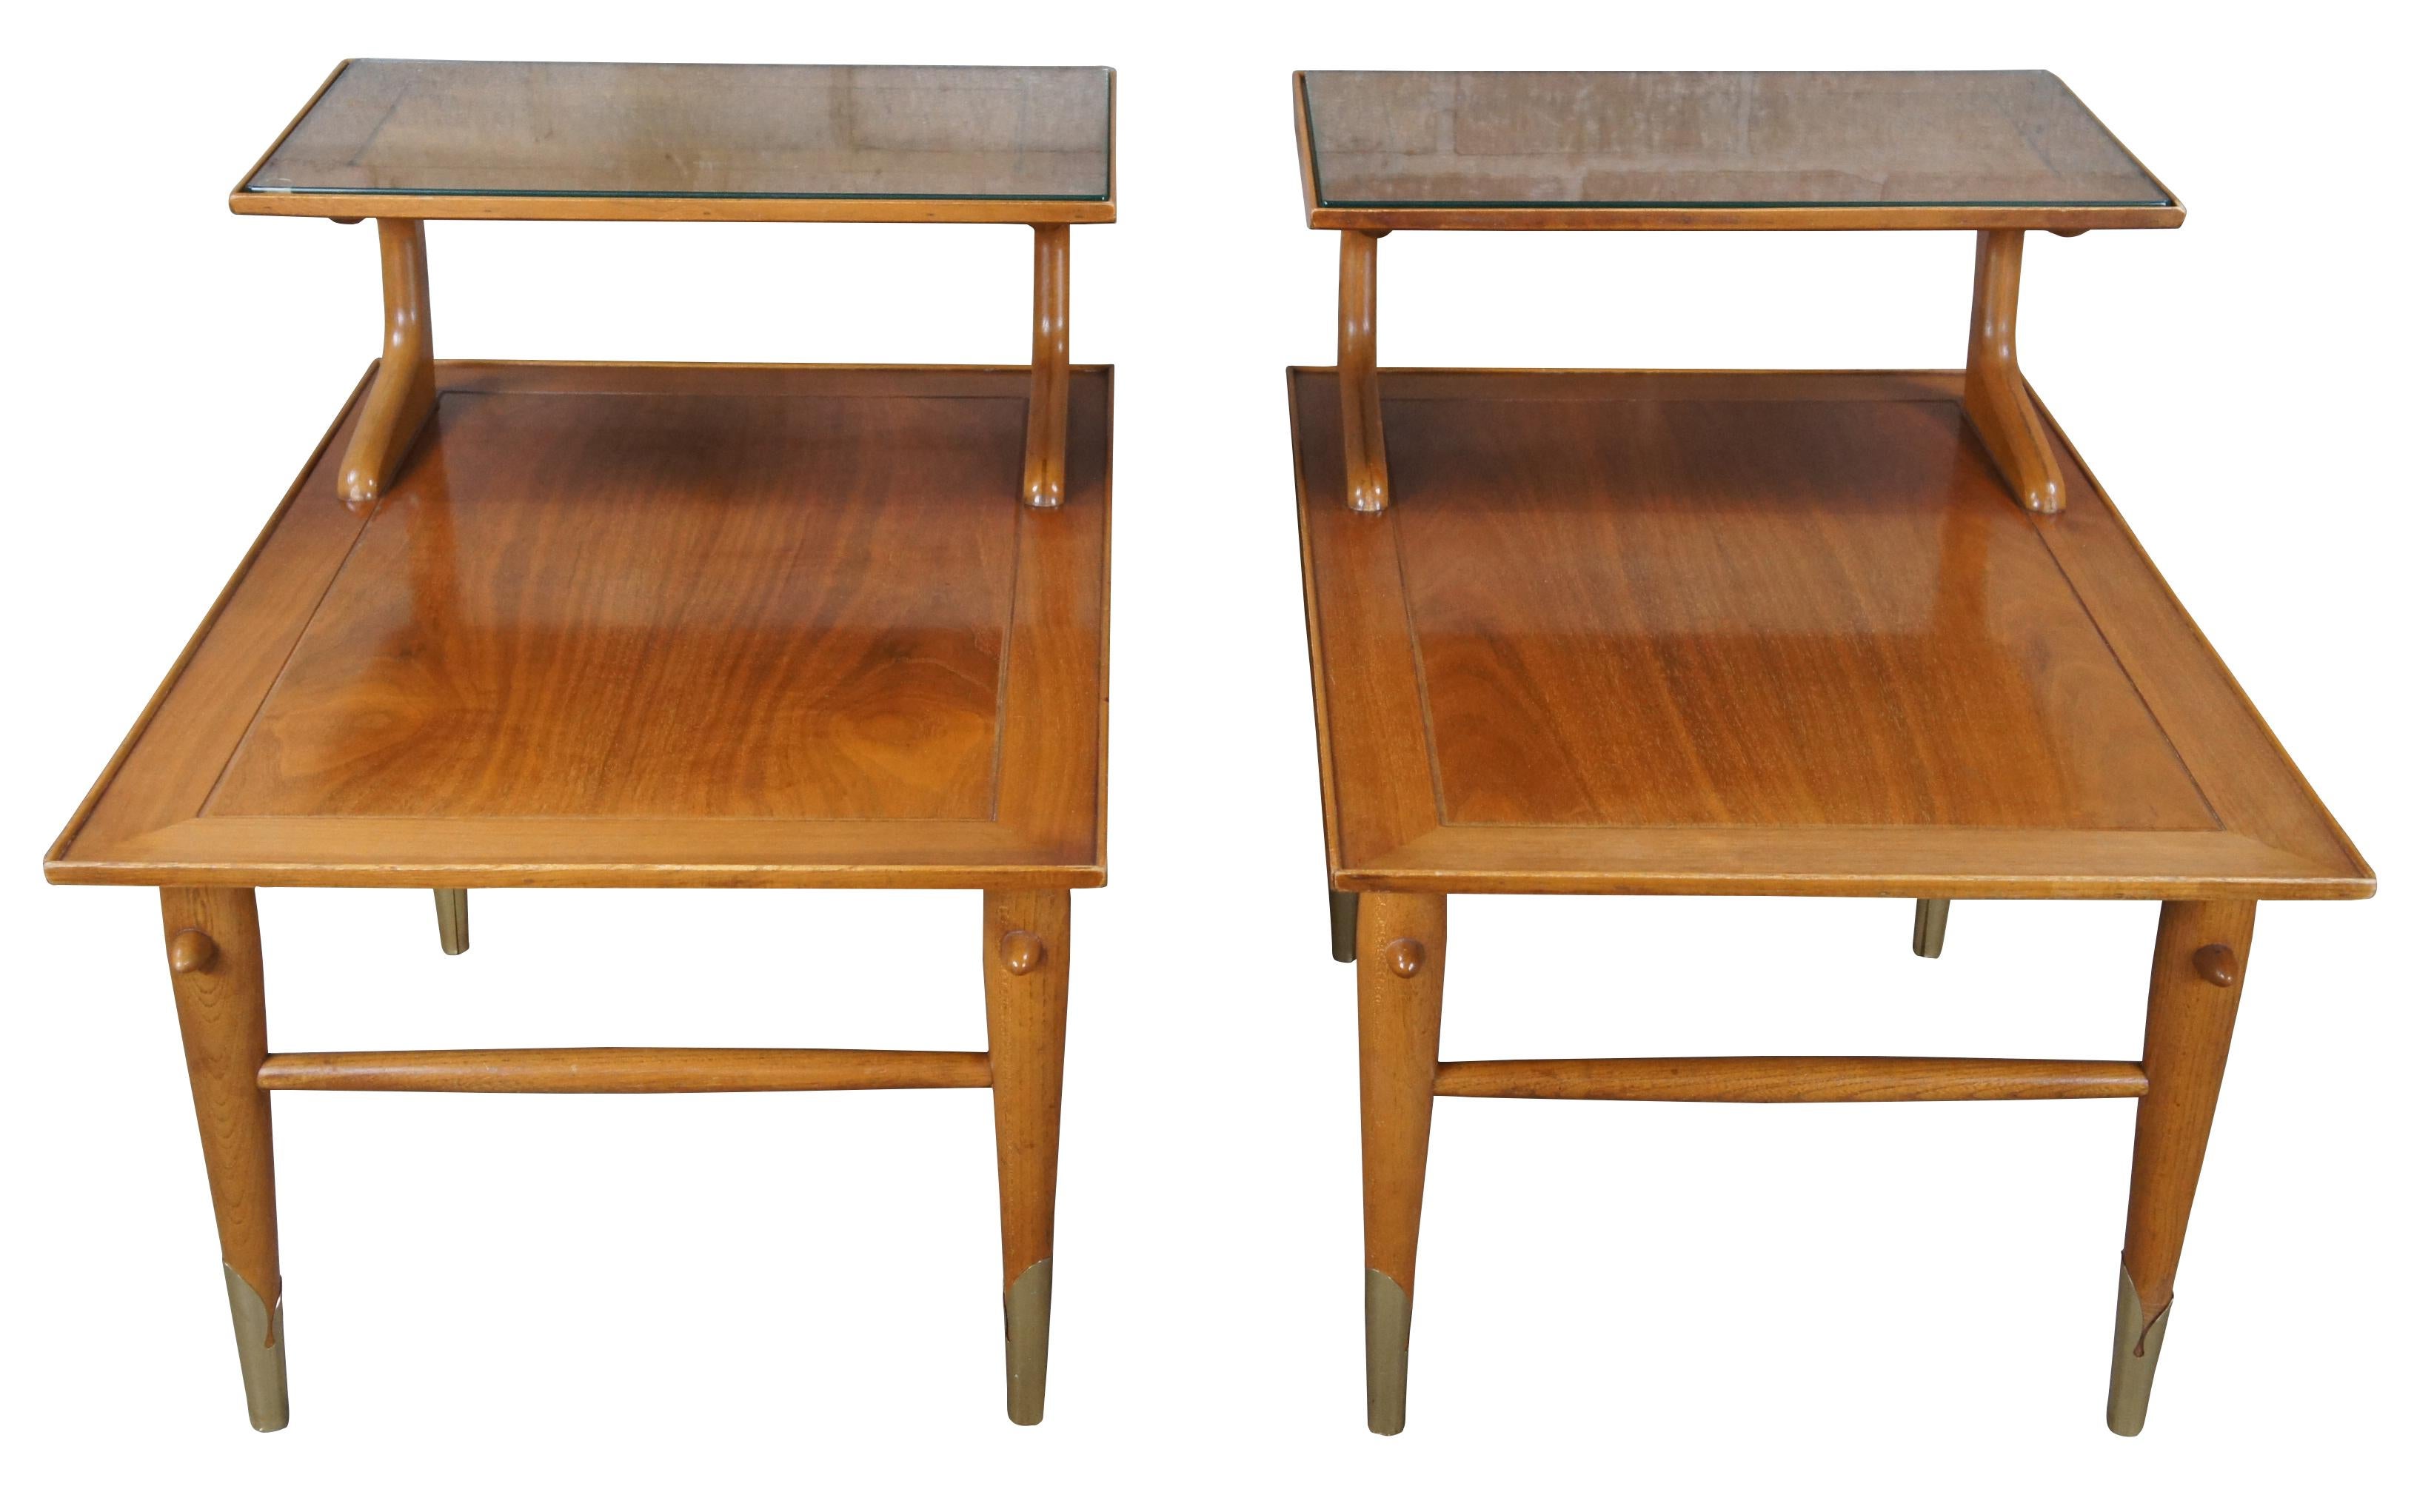 Mid century modern tiered Lane Altavista Copenhagen step tables featuring a two tiered design with brass wrapped tapered legs and glass inserts.  

Style 867, circa 01/26/1957 (serial no 756201)